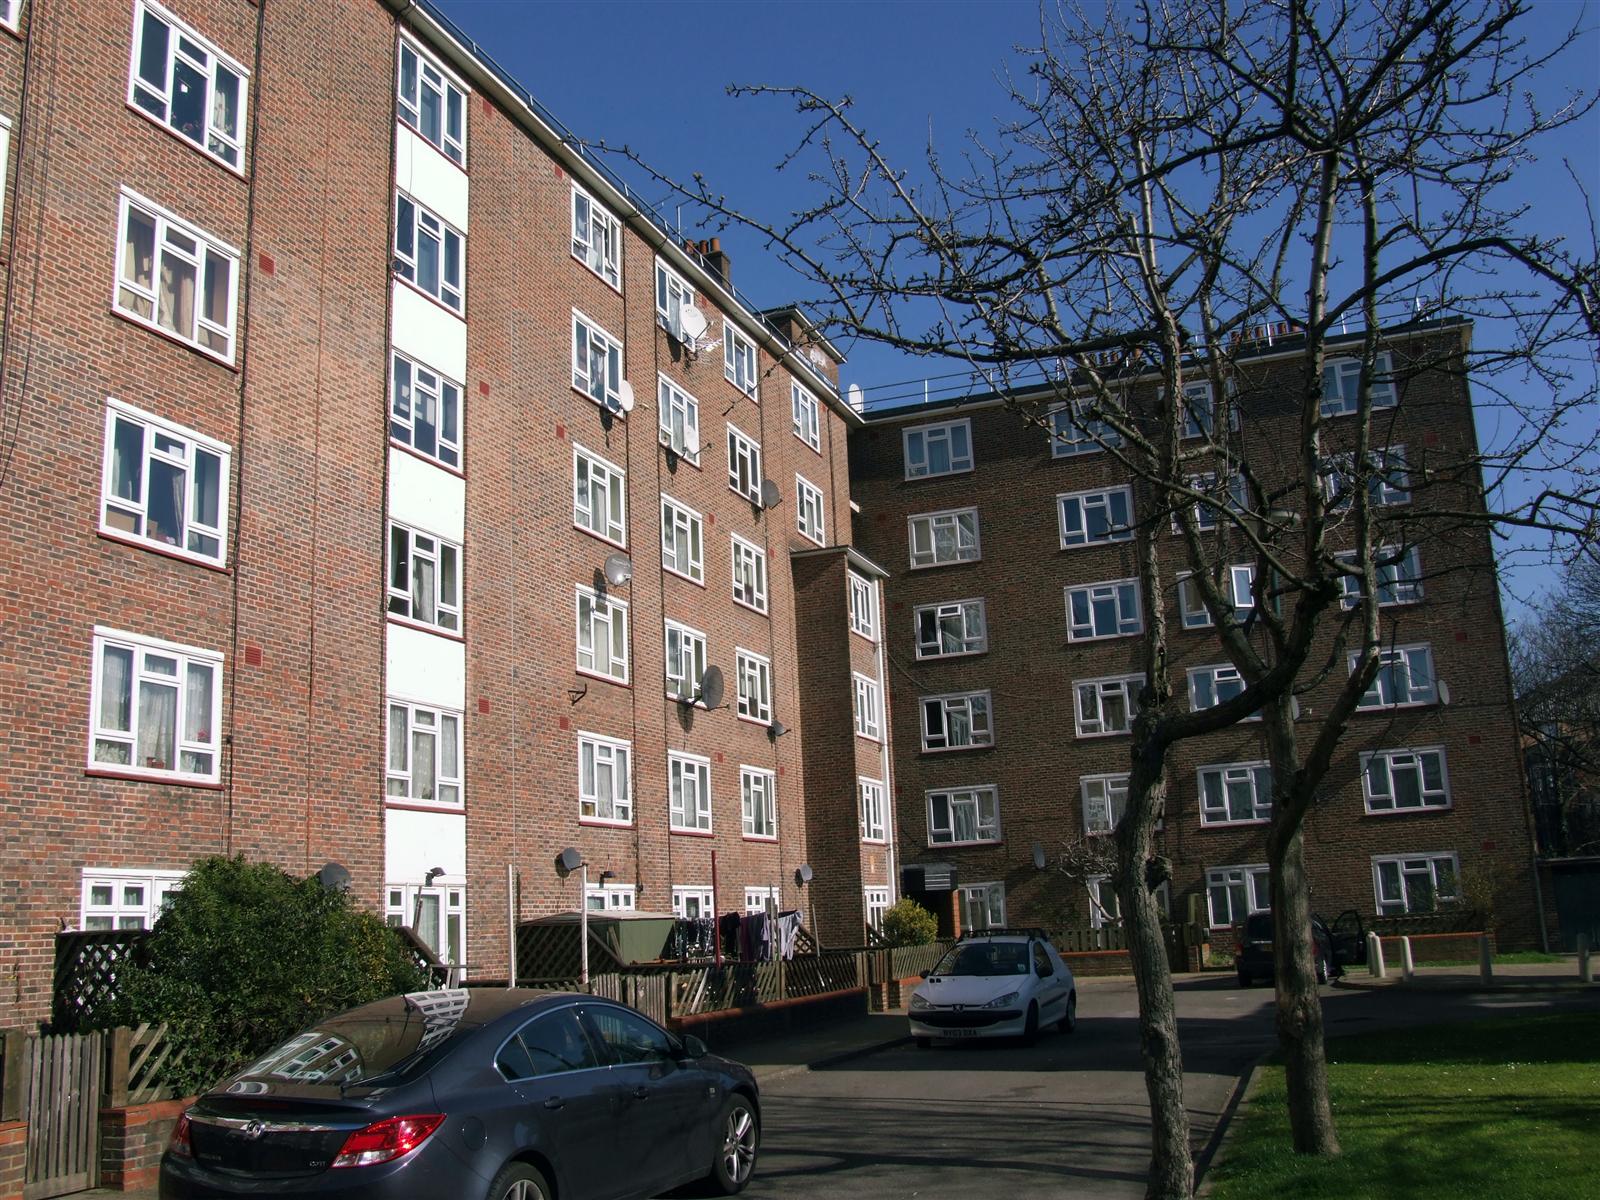 AVAILABLE FROM 16TH JANUARY 2021. Located on the second floor of this well respected block is this spacious furnished apartment. The accommodation comprises of a large studio apartment with double bed and furniture, an equipped kitchen (including new fridage/freezer & cooker) and separate ...